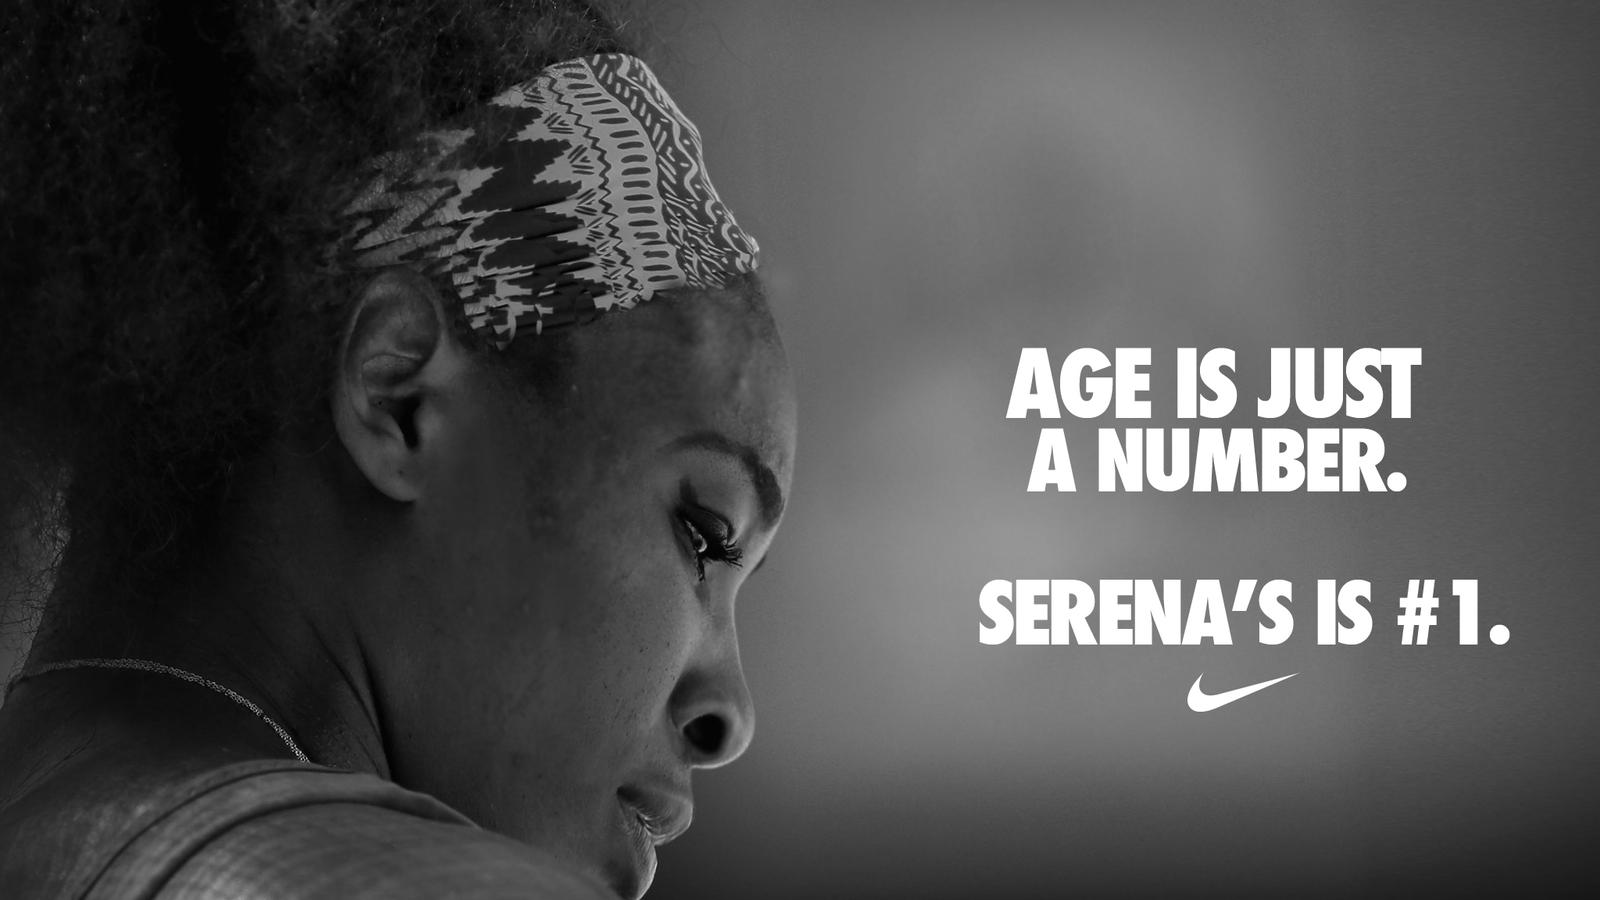 Serena Williams in an email campaign